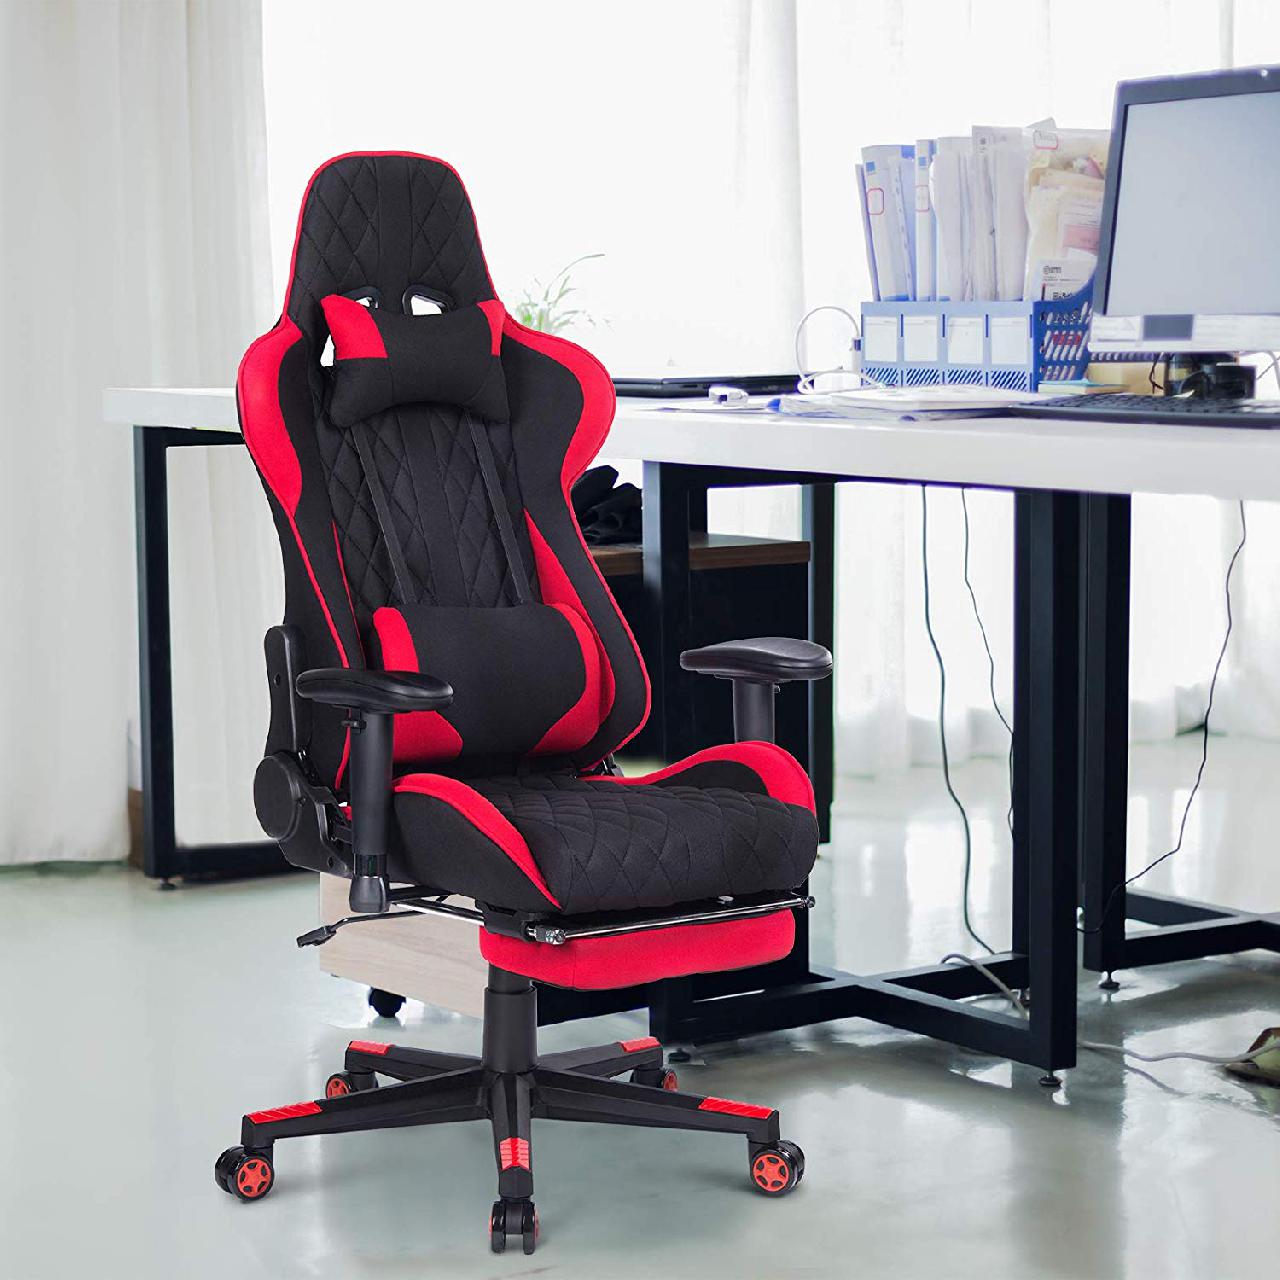 Gaming Chair With Headrest And Lumbar Cushion Made Of Fabric